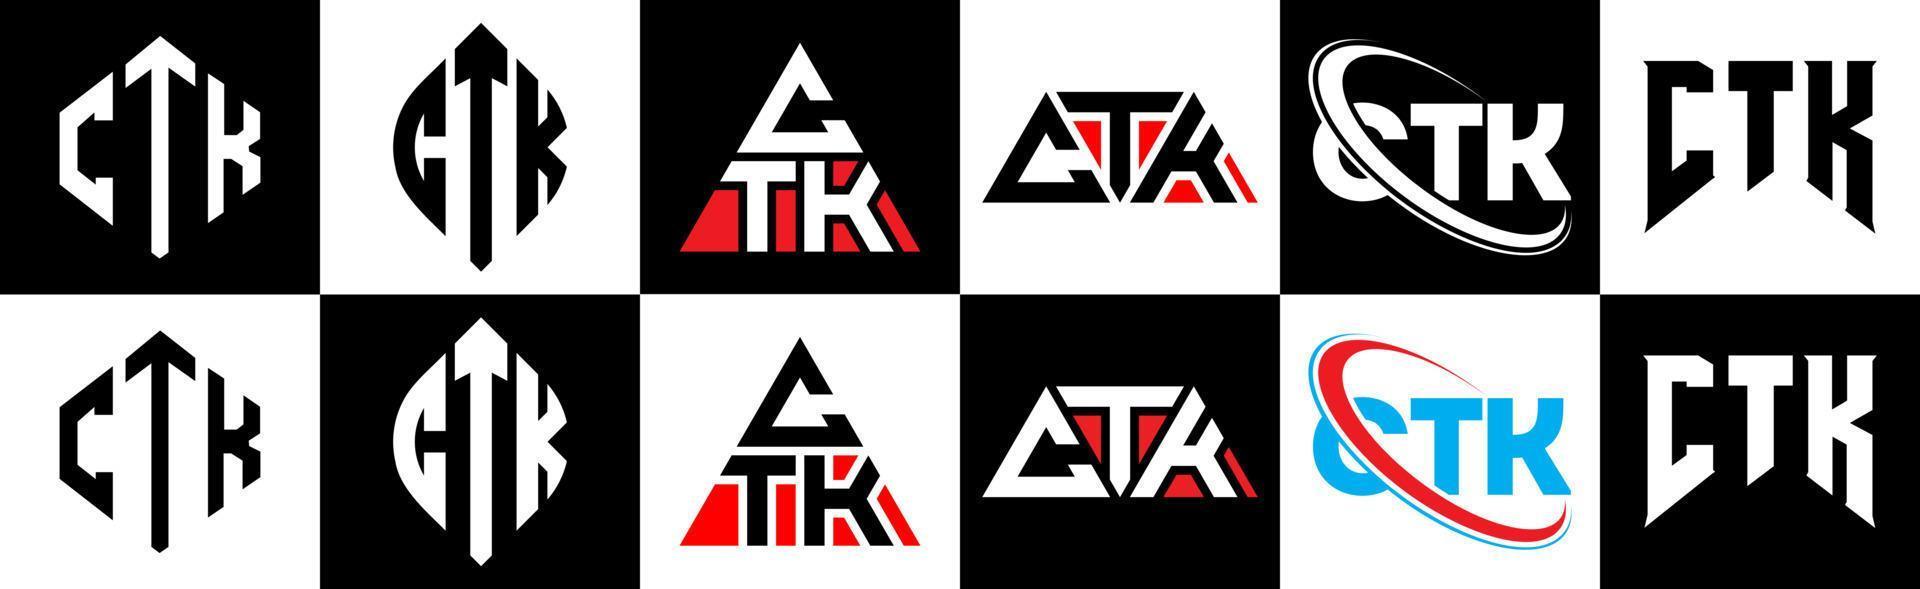 CTK letter logo design in six style. CTK polygon, circle, triangle, hexagon, flat and simple style with black and white color variation letter logo set in one artboard. CTK minimalist and classic logo vector